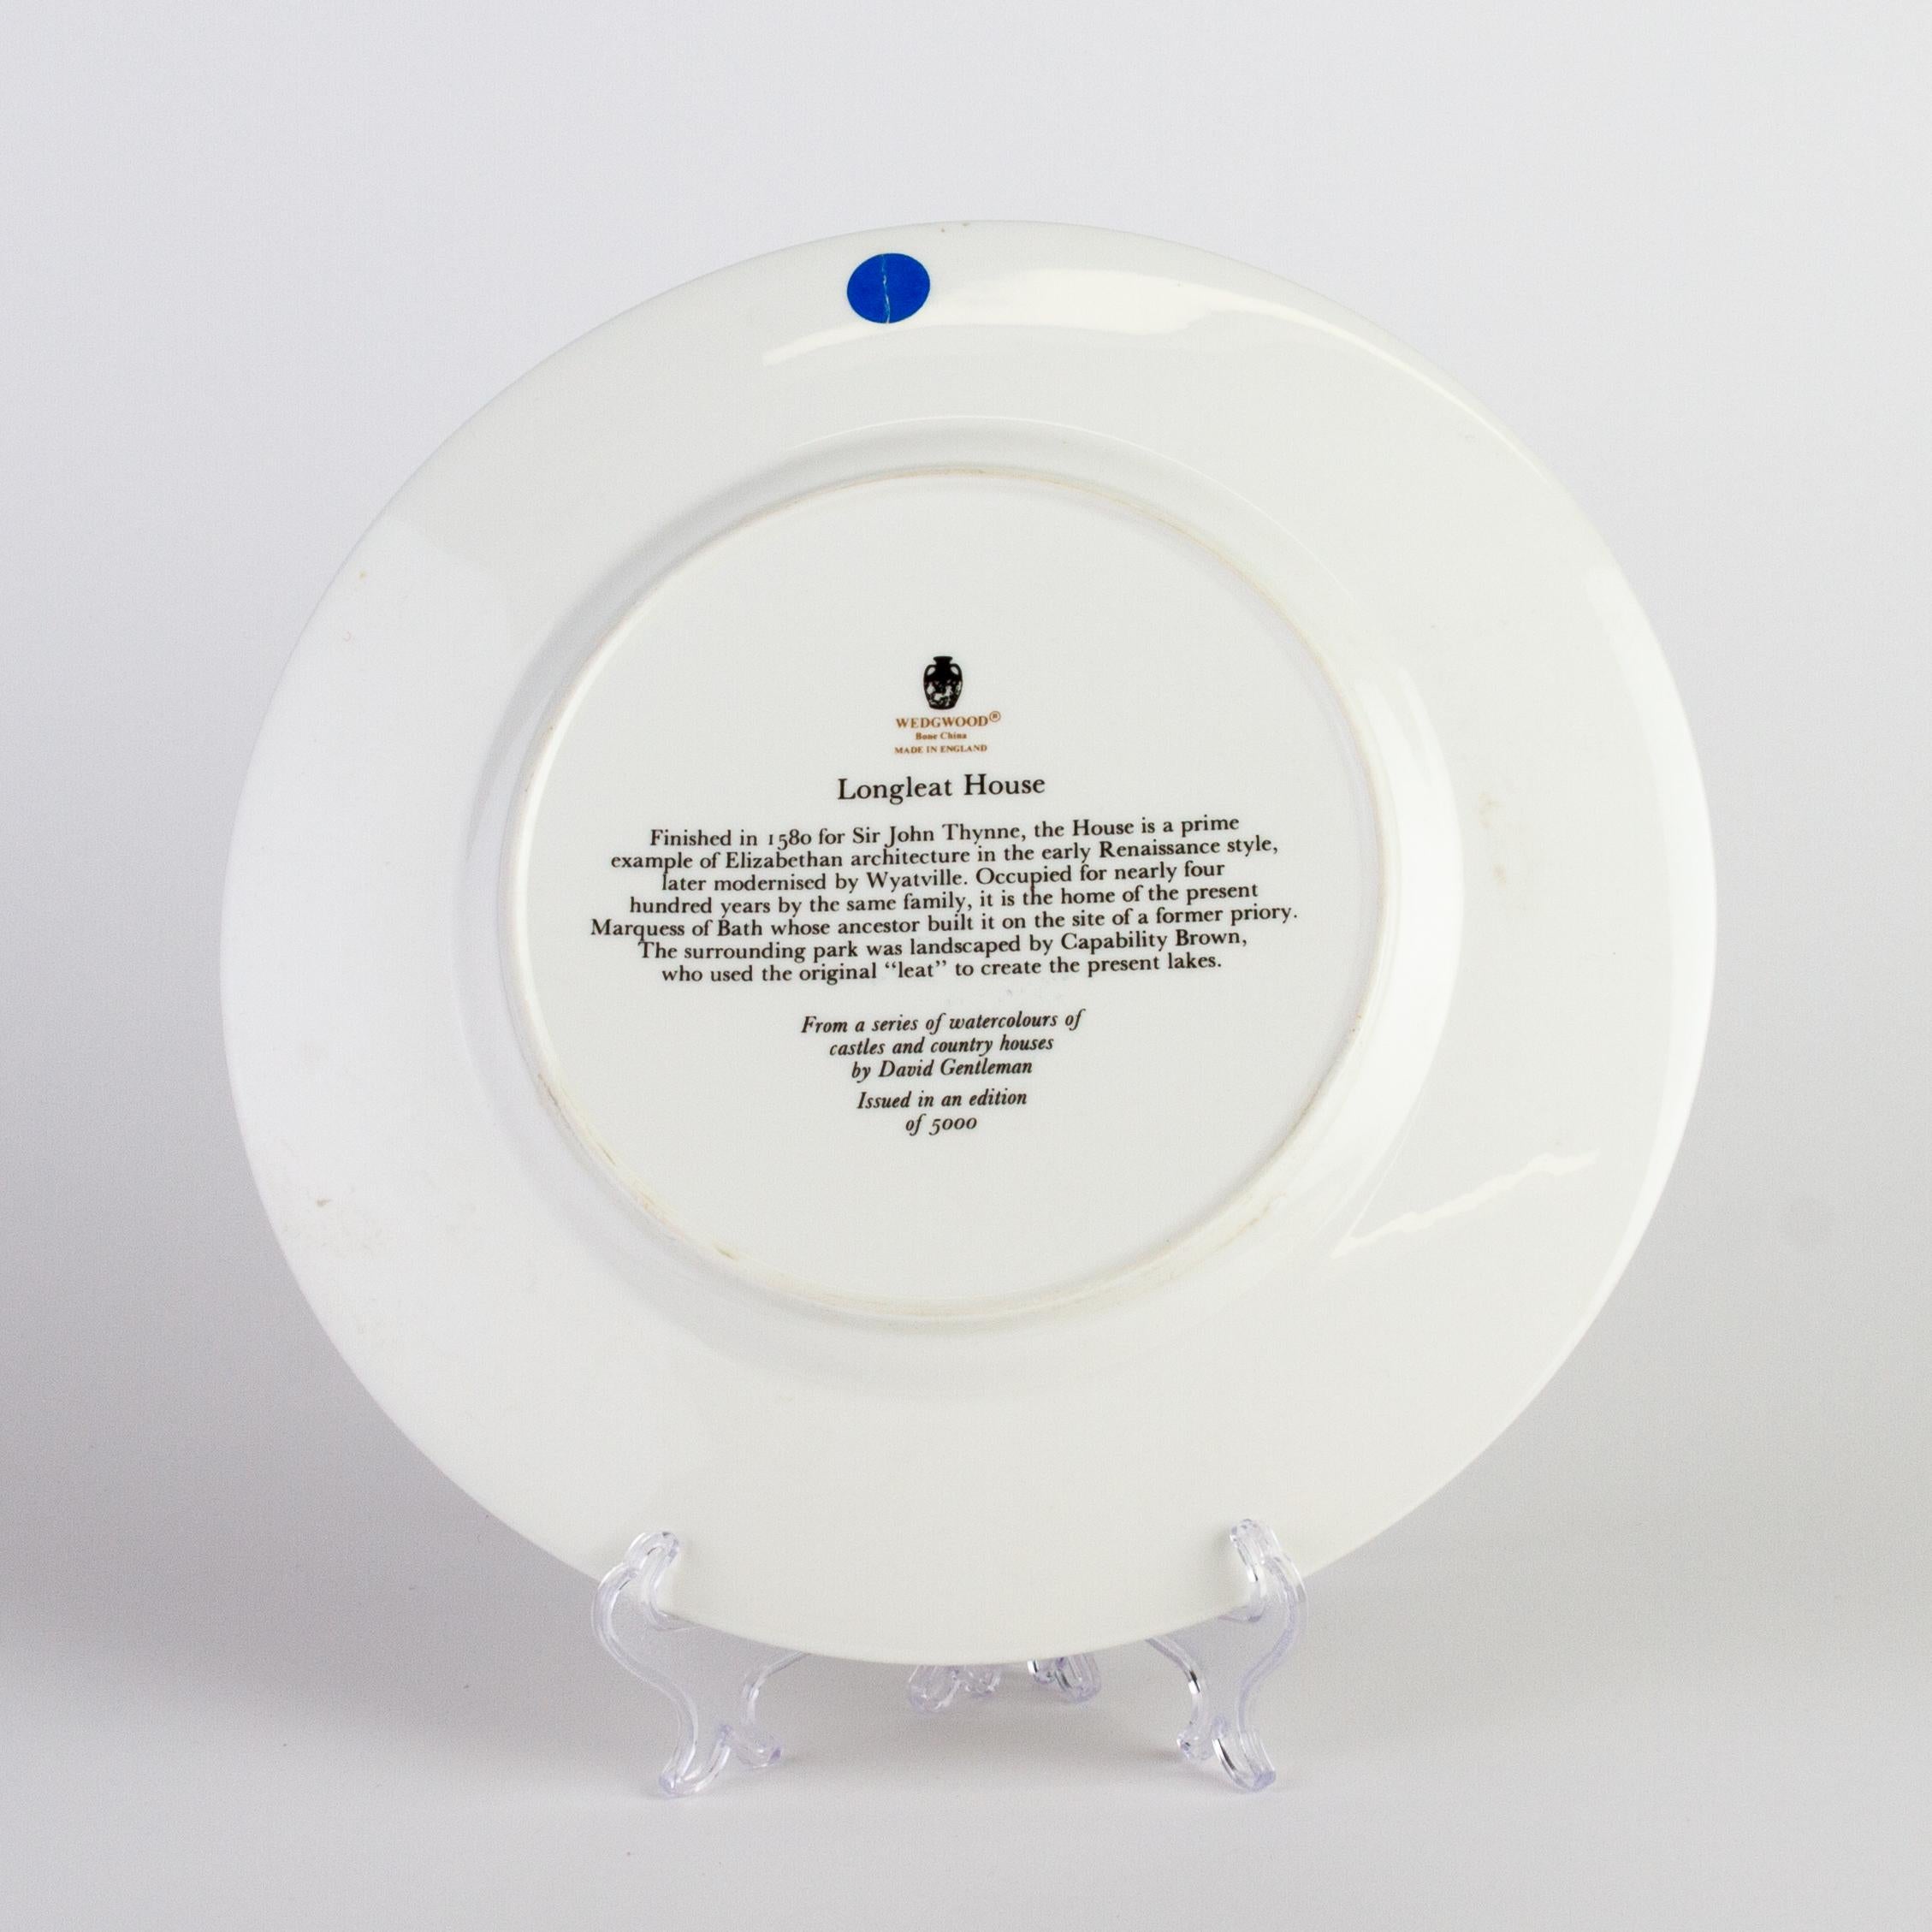 Wedgwood Fine English Porcelain Plate Depicting Longleat House For Sale 1